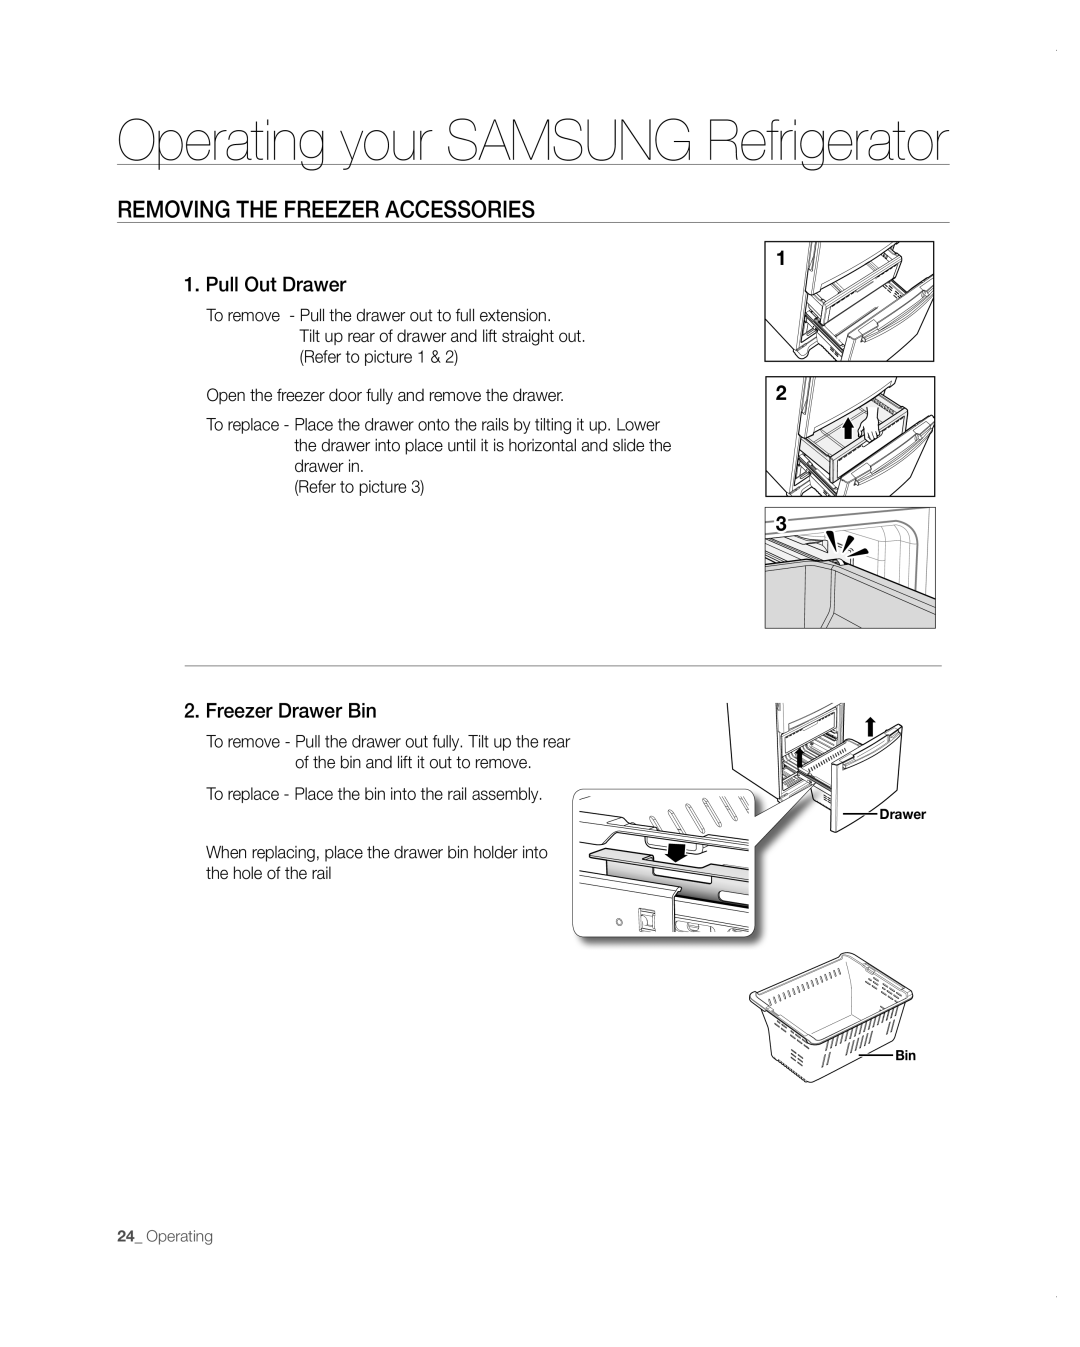 Samsung RB197ABBP user manual Removing The Freezer Accessories, Pull Out Drawer, Freezer Drawer Bin 